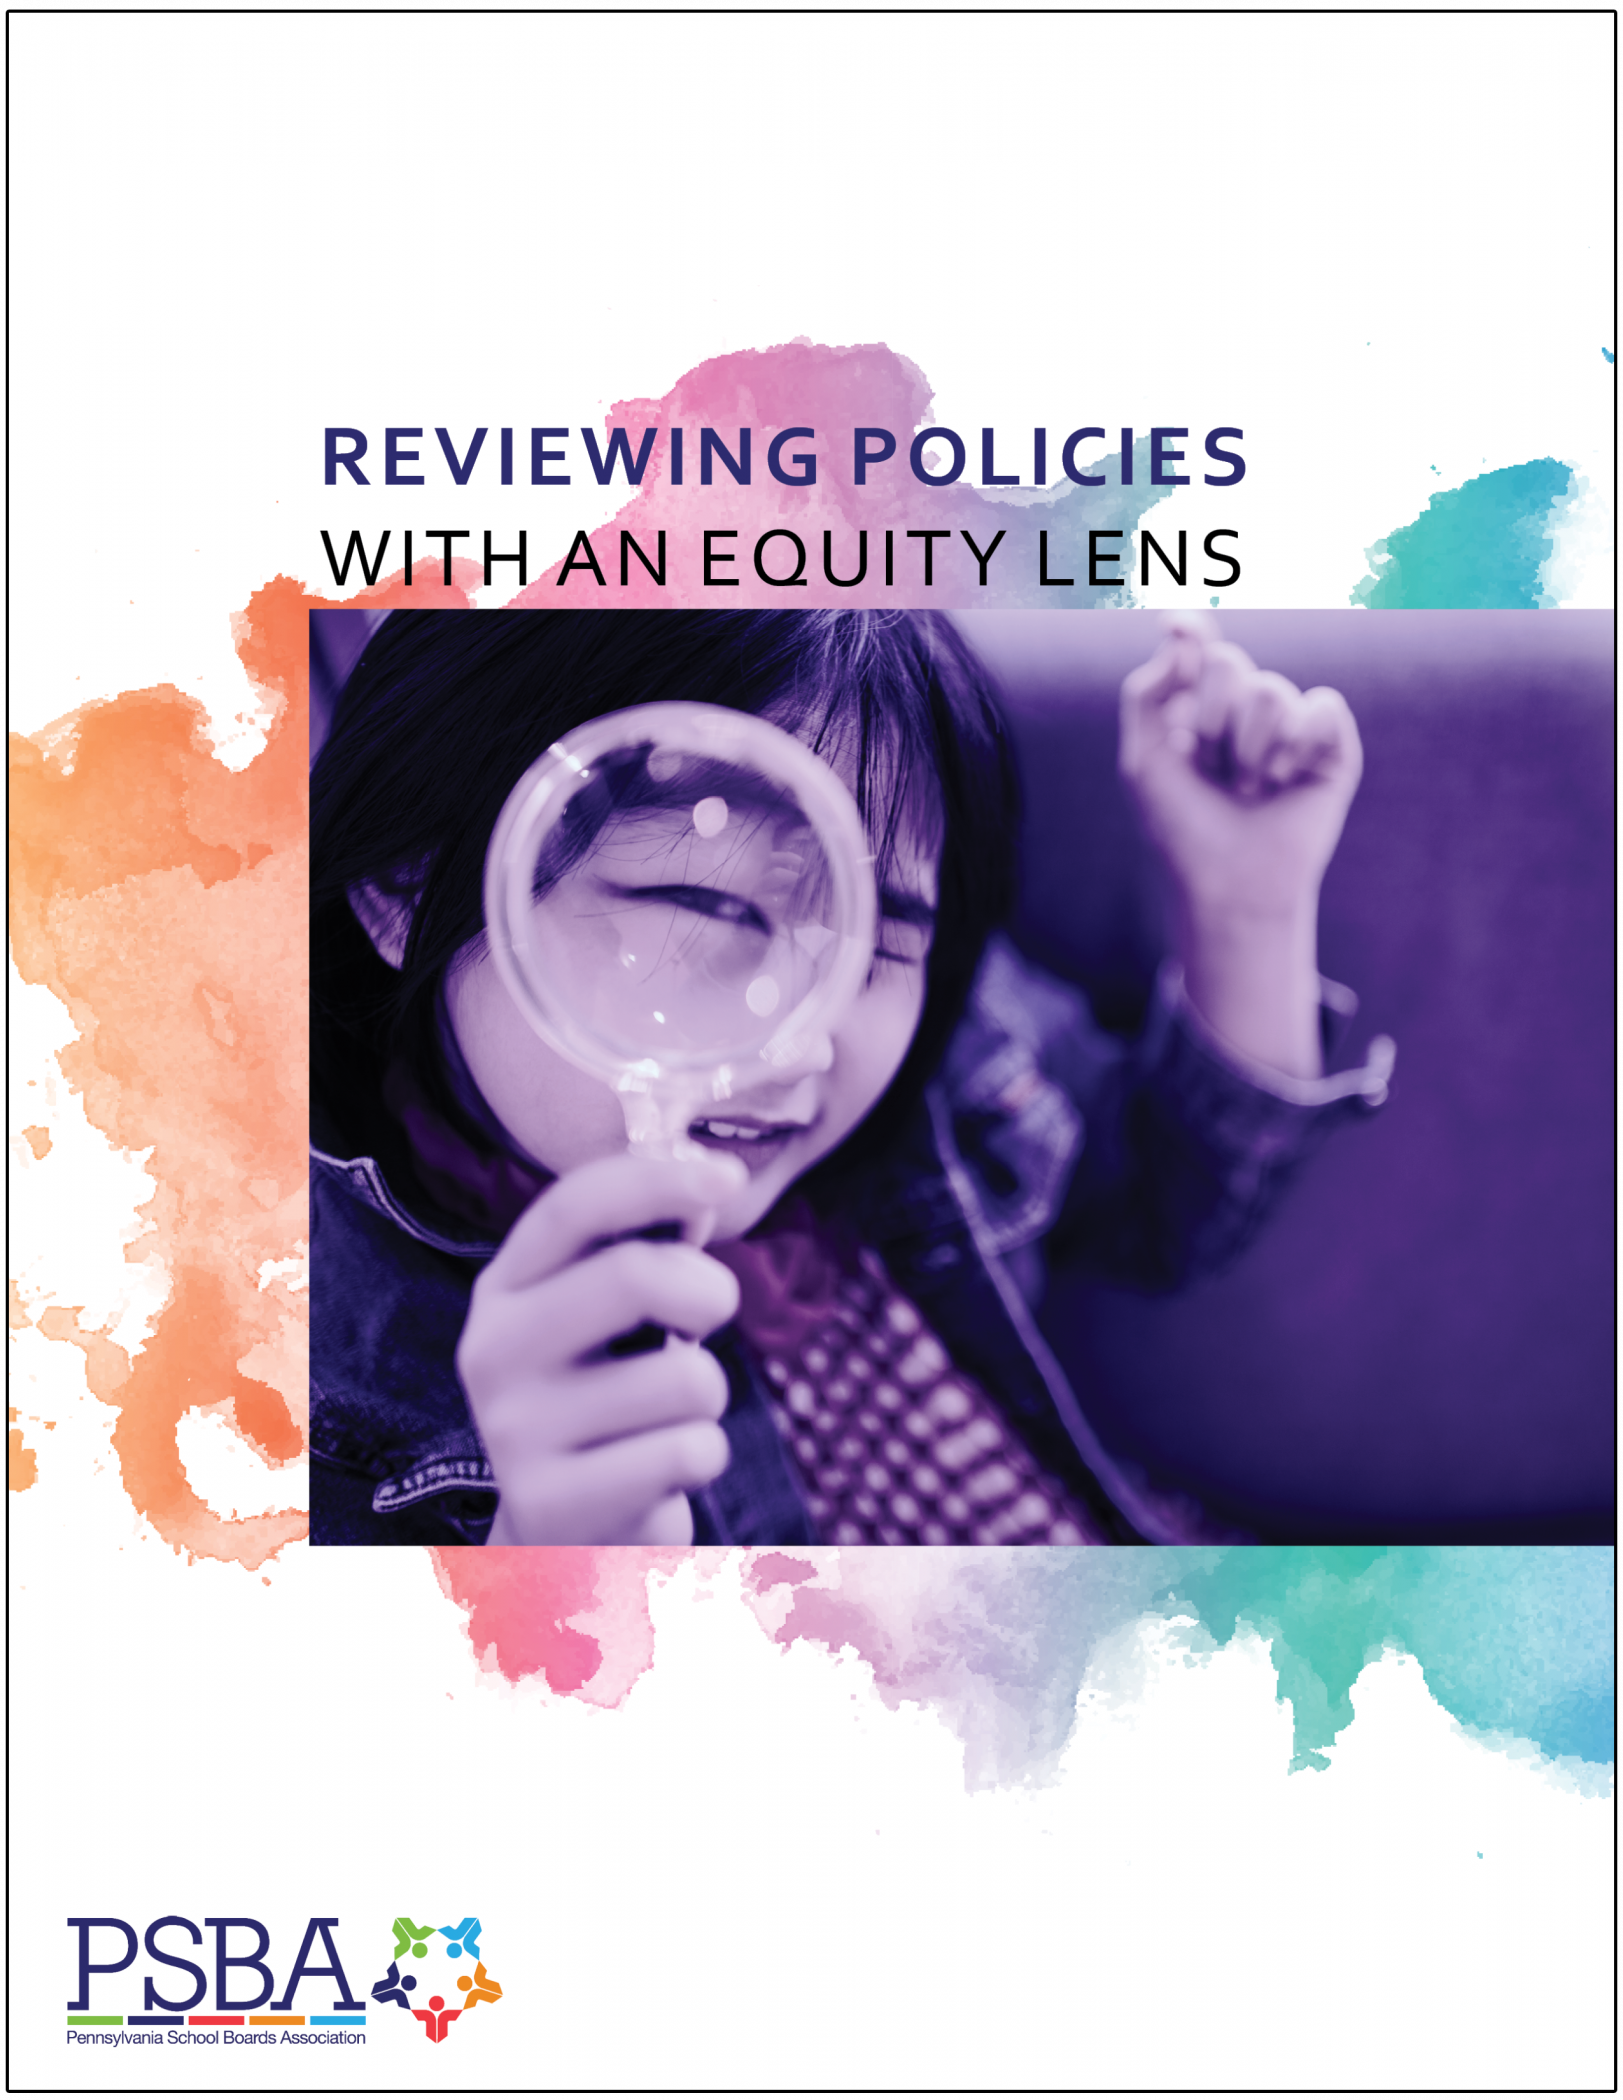 Reviewing policies with an equity lens